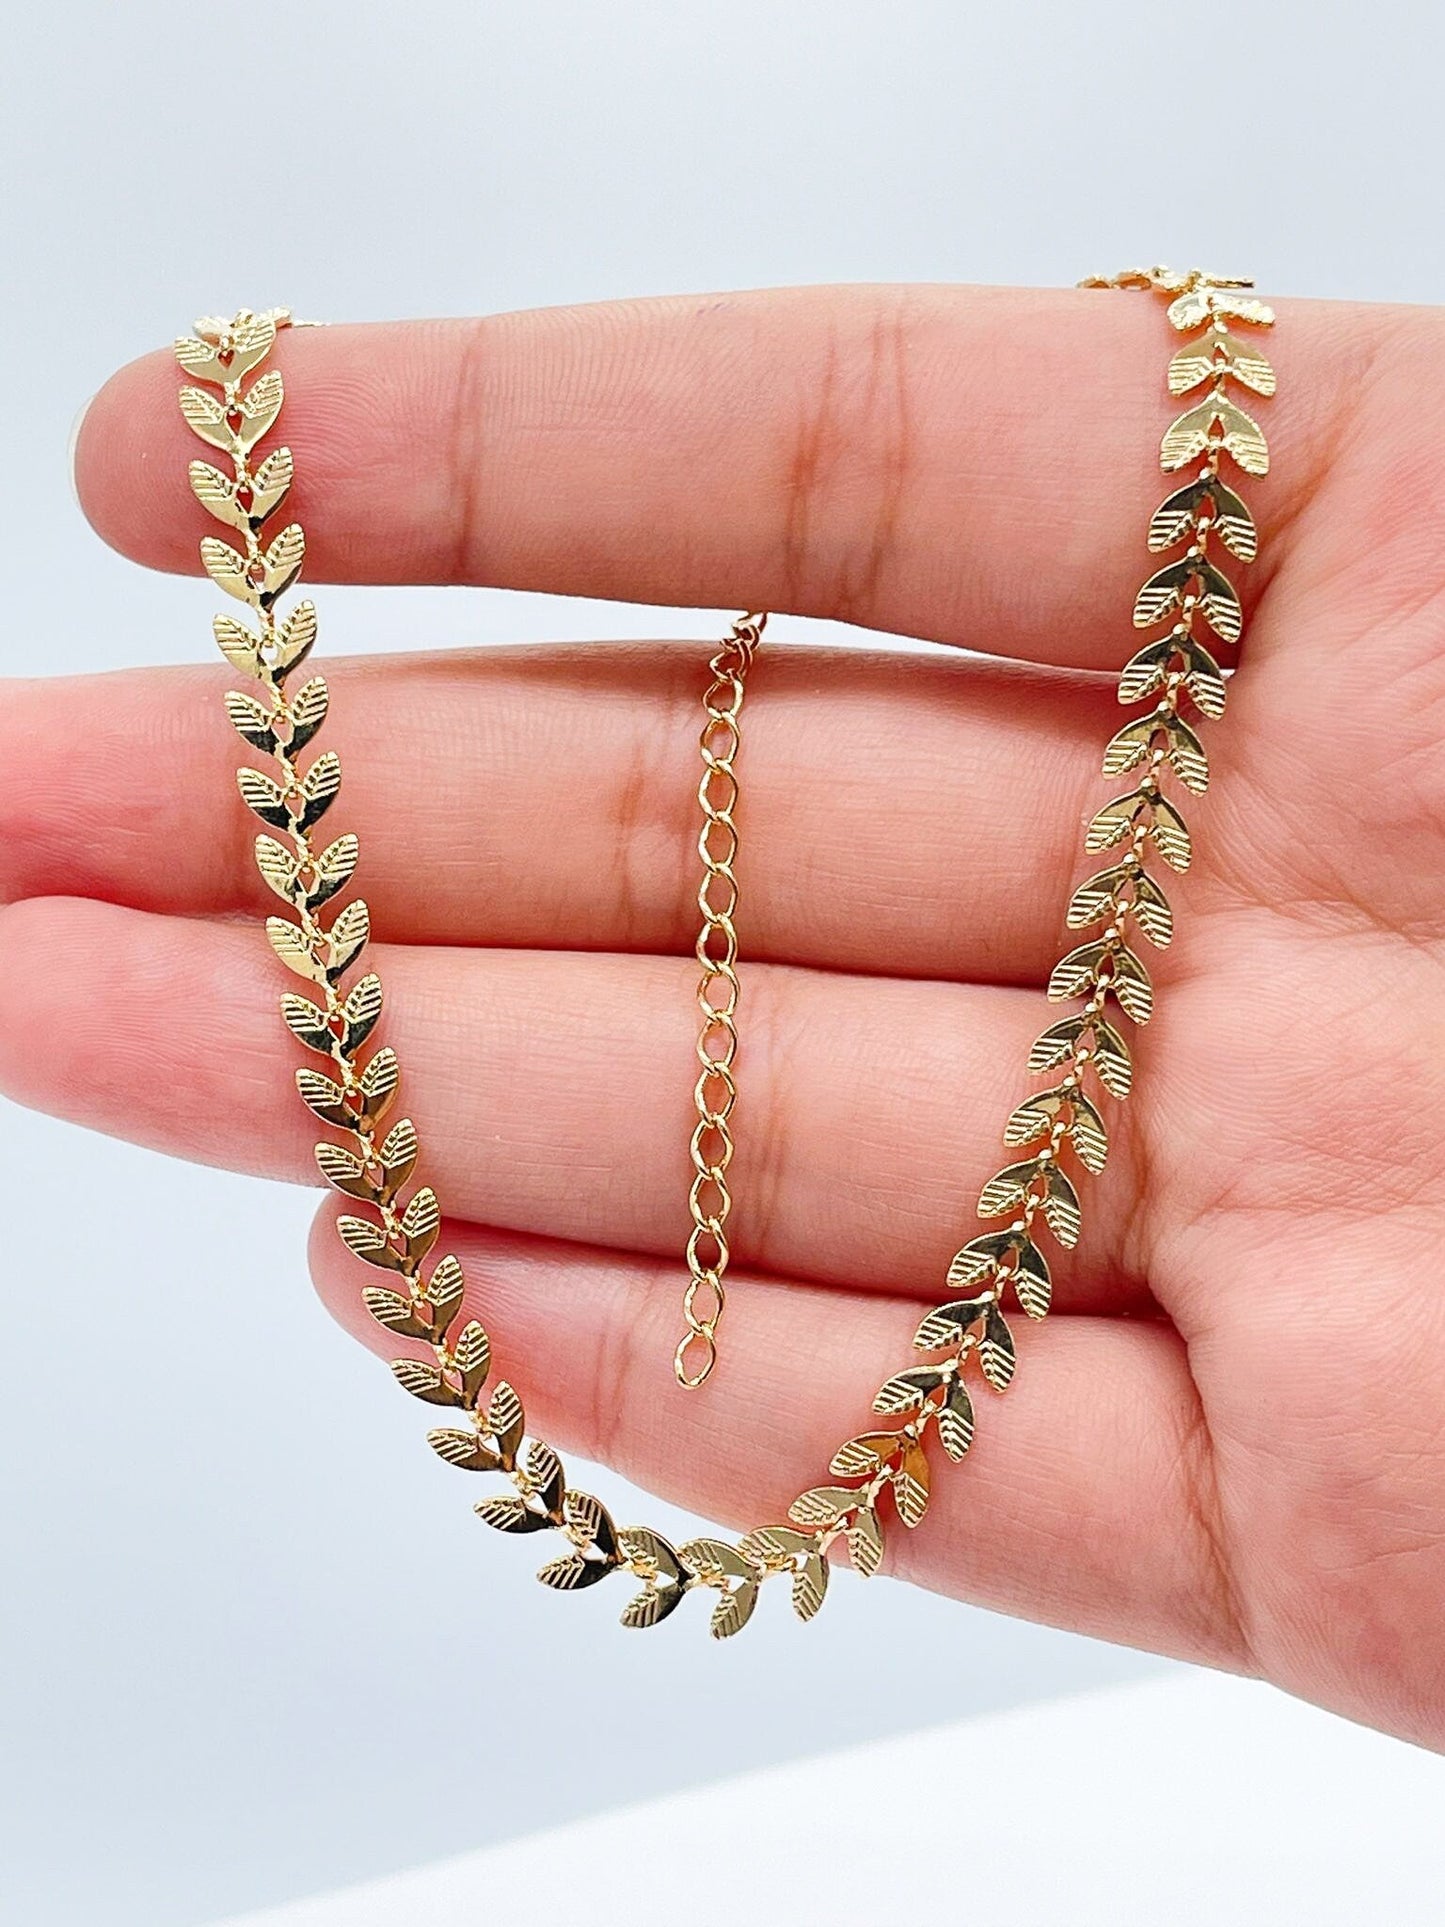 18k Gold Layered Fishtail Anklet Size 11" Length with Extension Wholesale